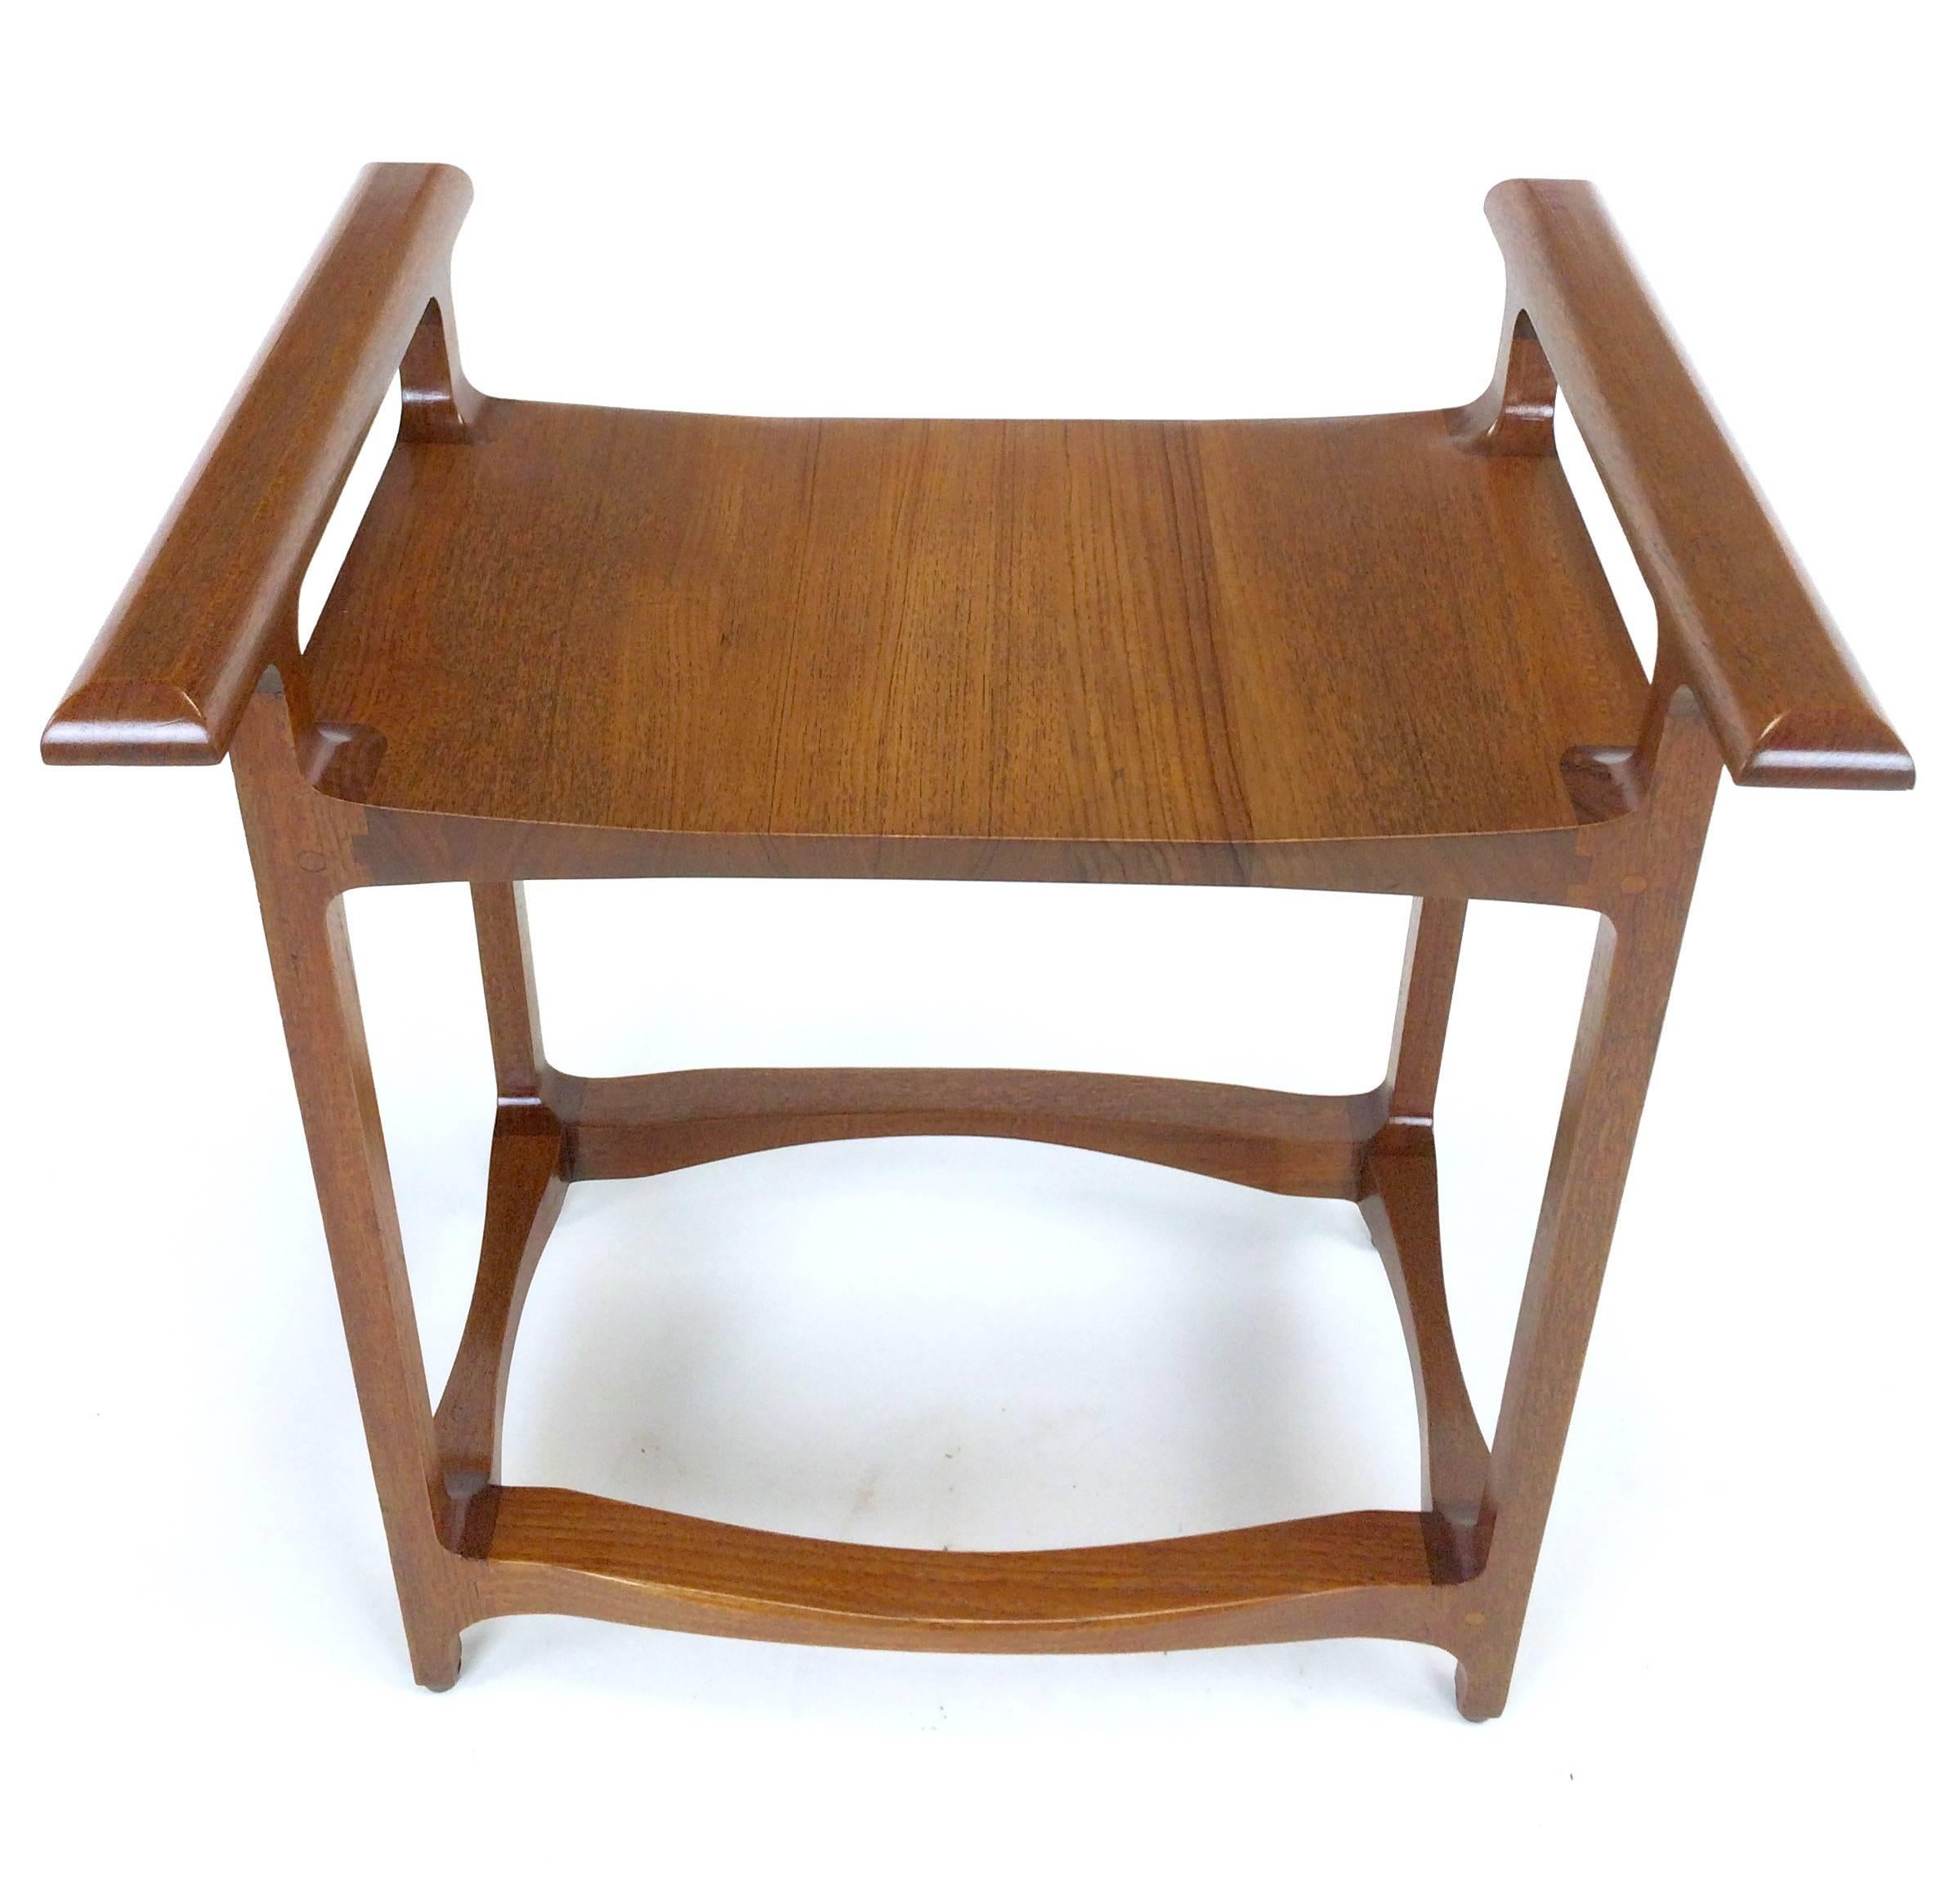 Late 20th Century Signed and Dated Studio Crafted Teak Wood Bench Seat For Sale